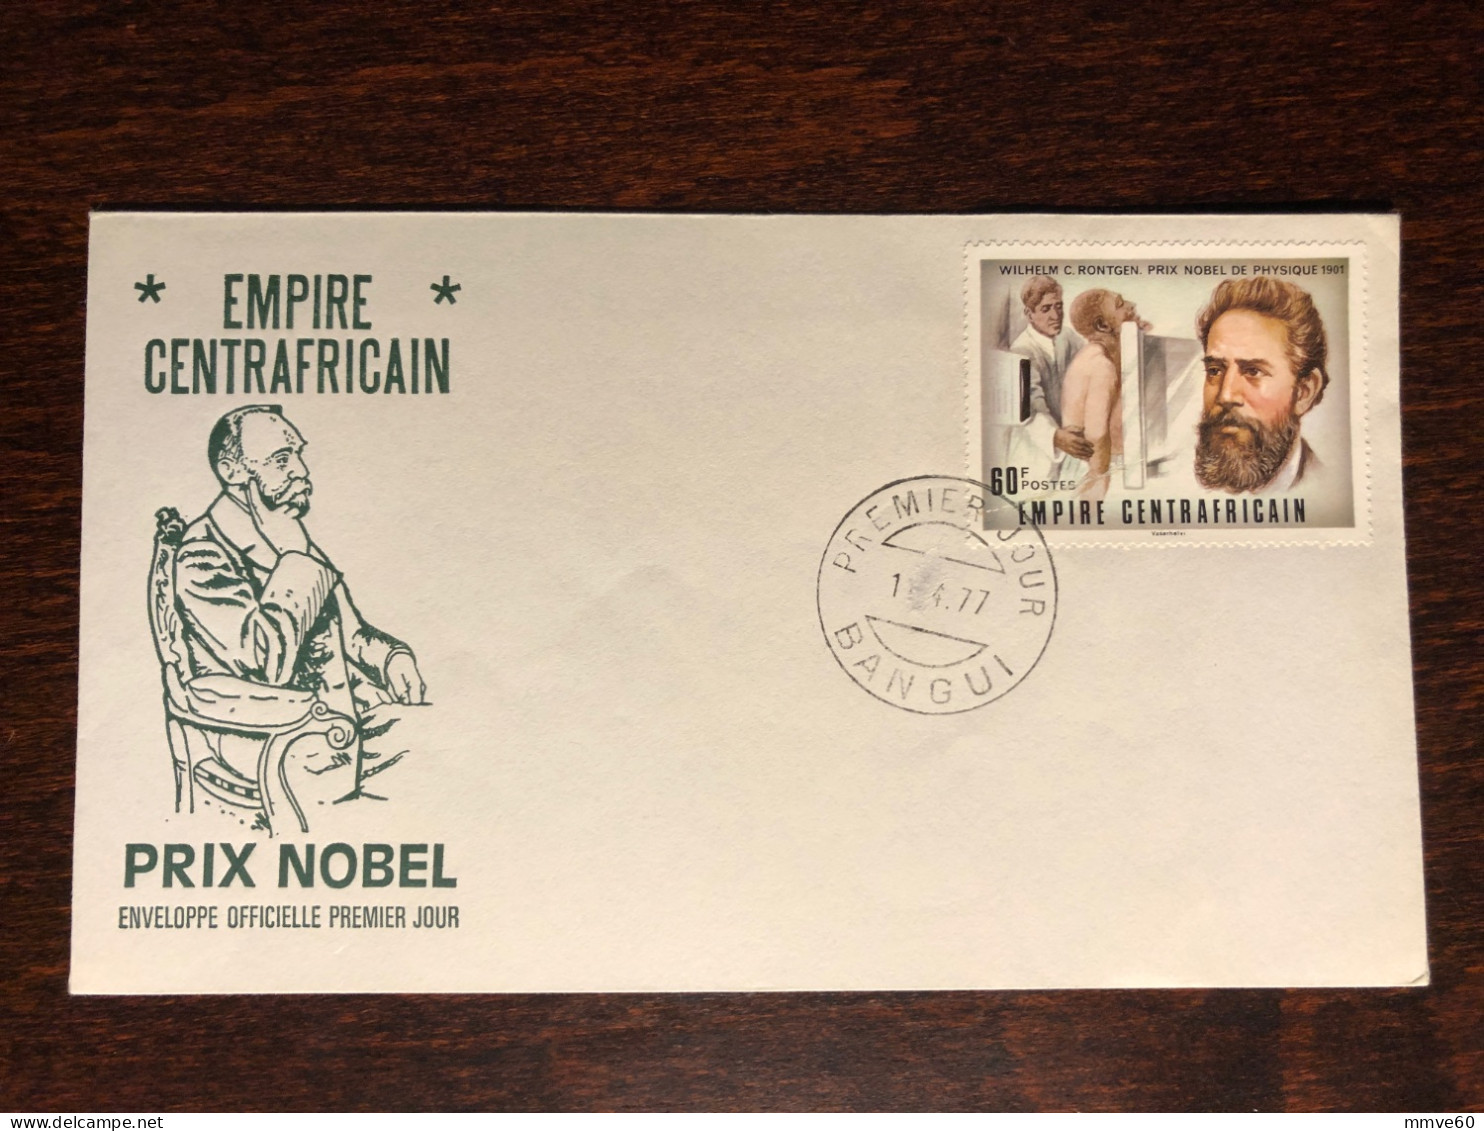 CENTRAFRICANE CENTRAL AFRICA FDC COVER 1977 YEAR RONTGEN NOBEL PRIZE RENTGENOLOGY X-RAY HEALTH MEDICINE STAMPS - Repubblica Centroafricana